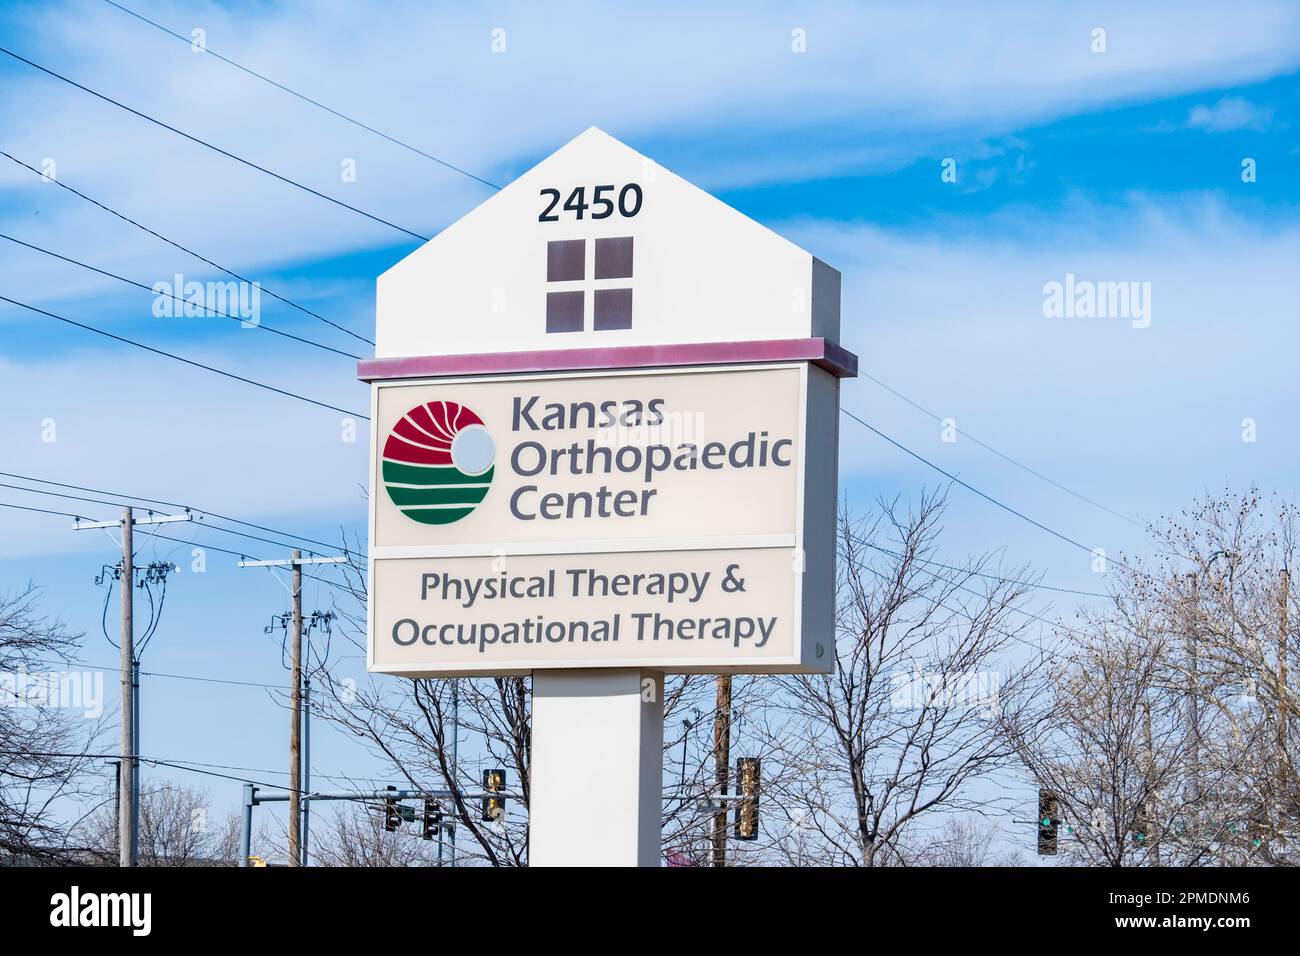 Pole sign advertising Kansas Orthopaedic Center for Physical Therapy & Occupational Therapy in Wichita, Kansas, USA. Stock Photo